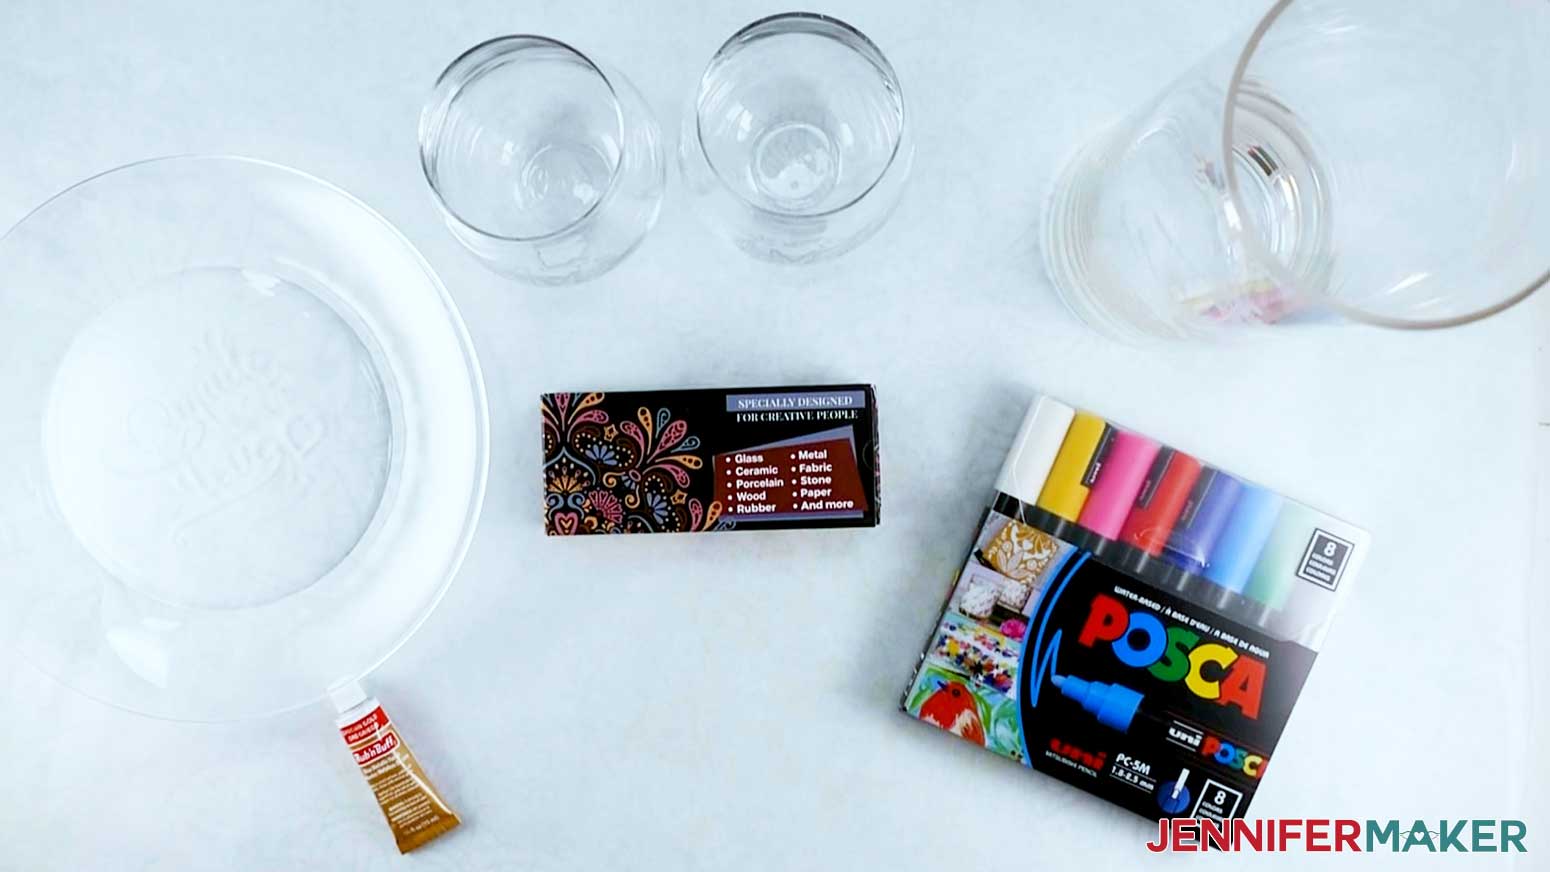 An overhead photo of a glass plate with a tube of gold Rub n Buff displayed below it, two stemless wine glasses with a package of oil-based paint pens displayed below them, and a glass vase with a package of water-based paint markers displayed below it